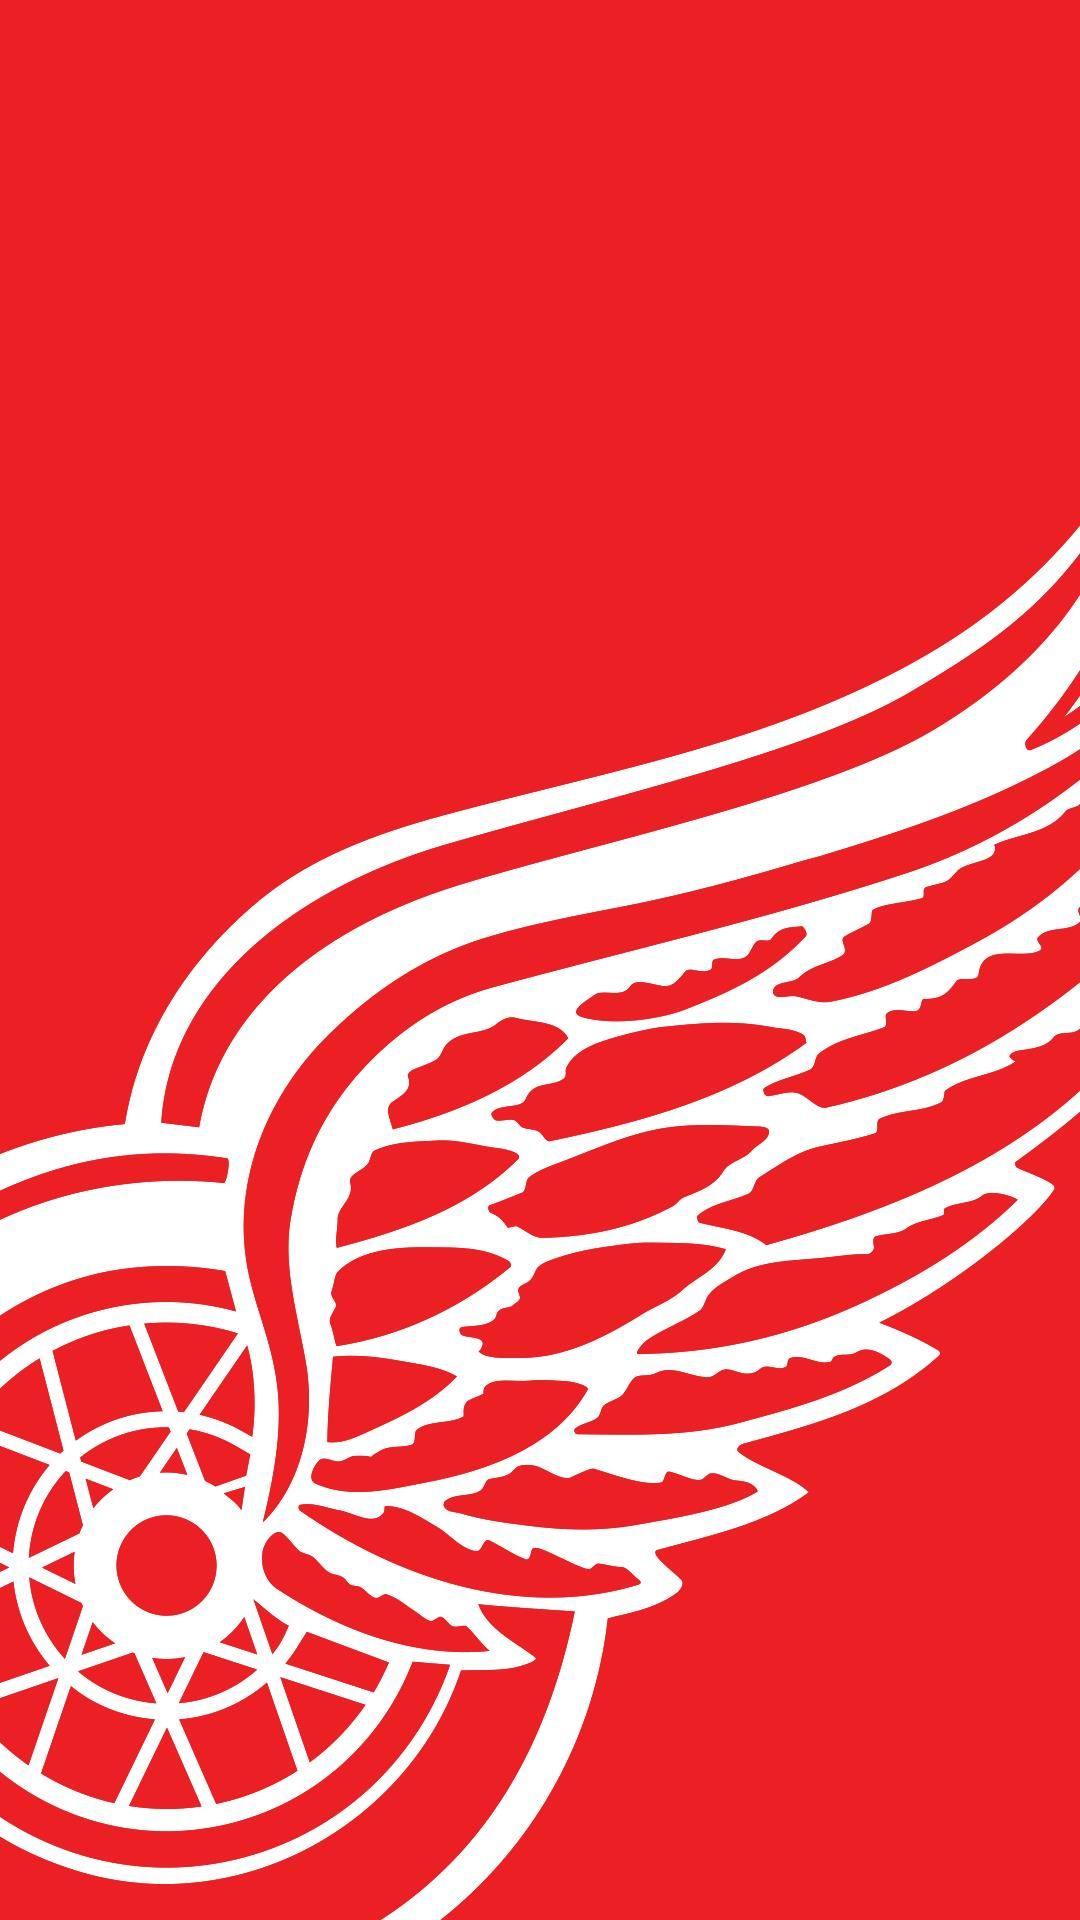 Detroit Red Wings Logo - My ❤, My Obsession Hockey. Detroit Red